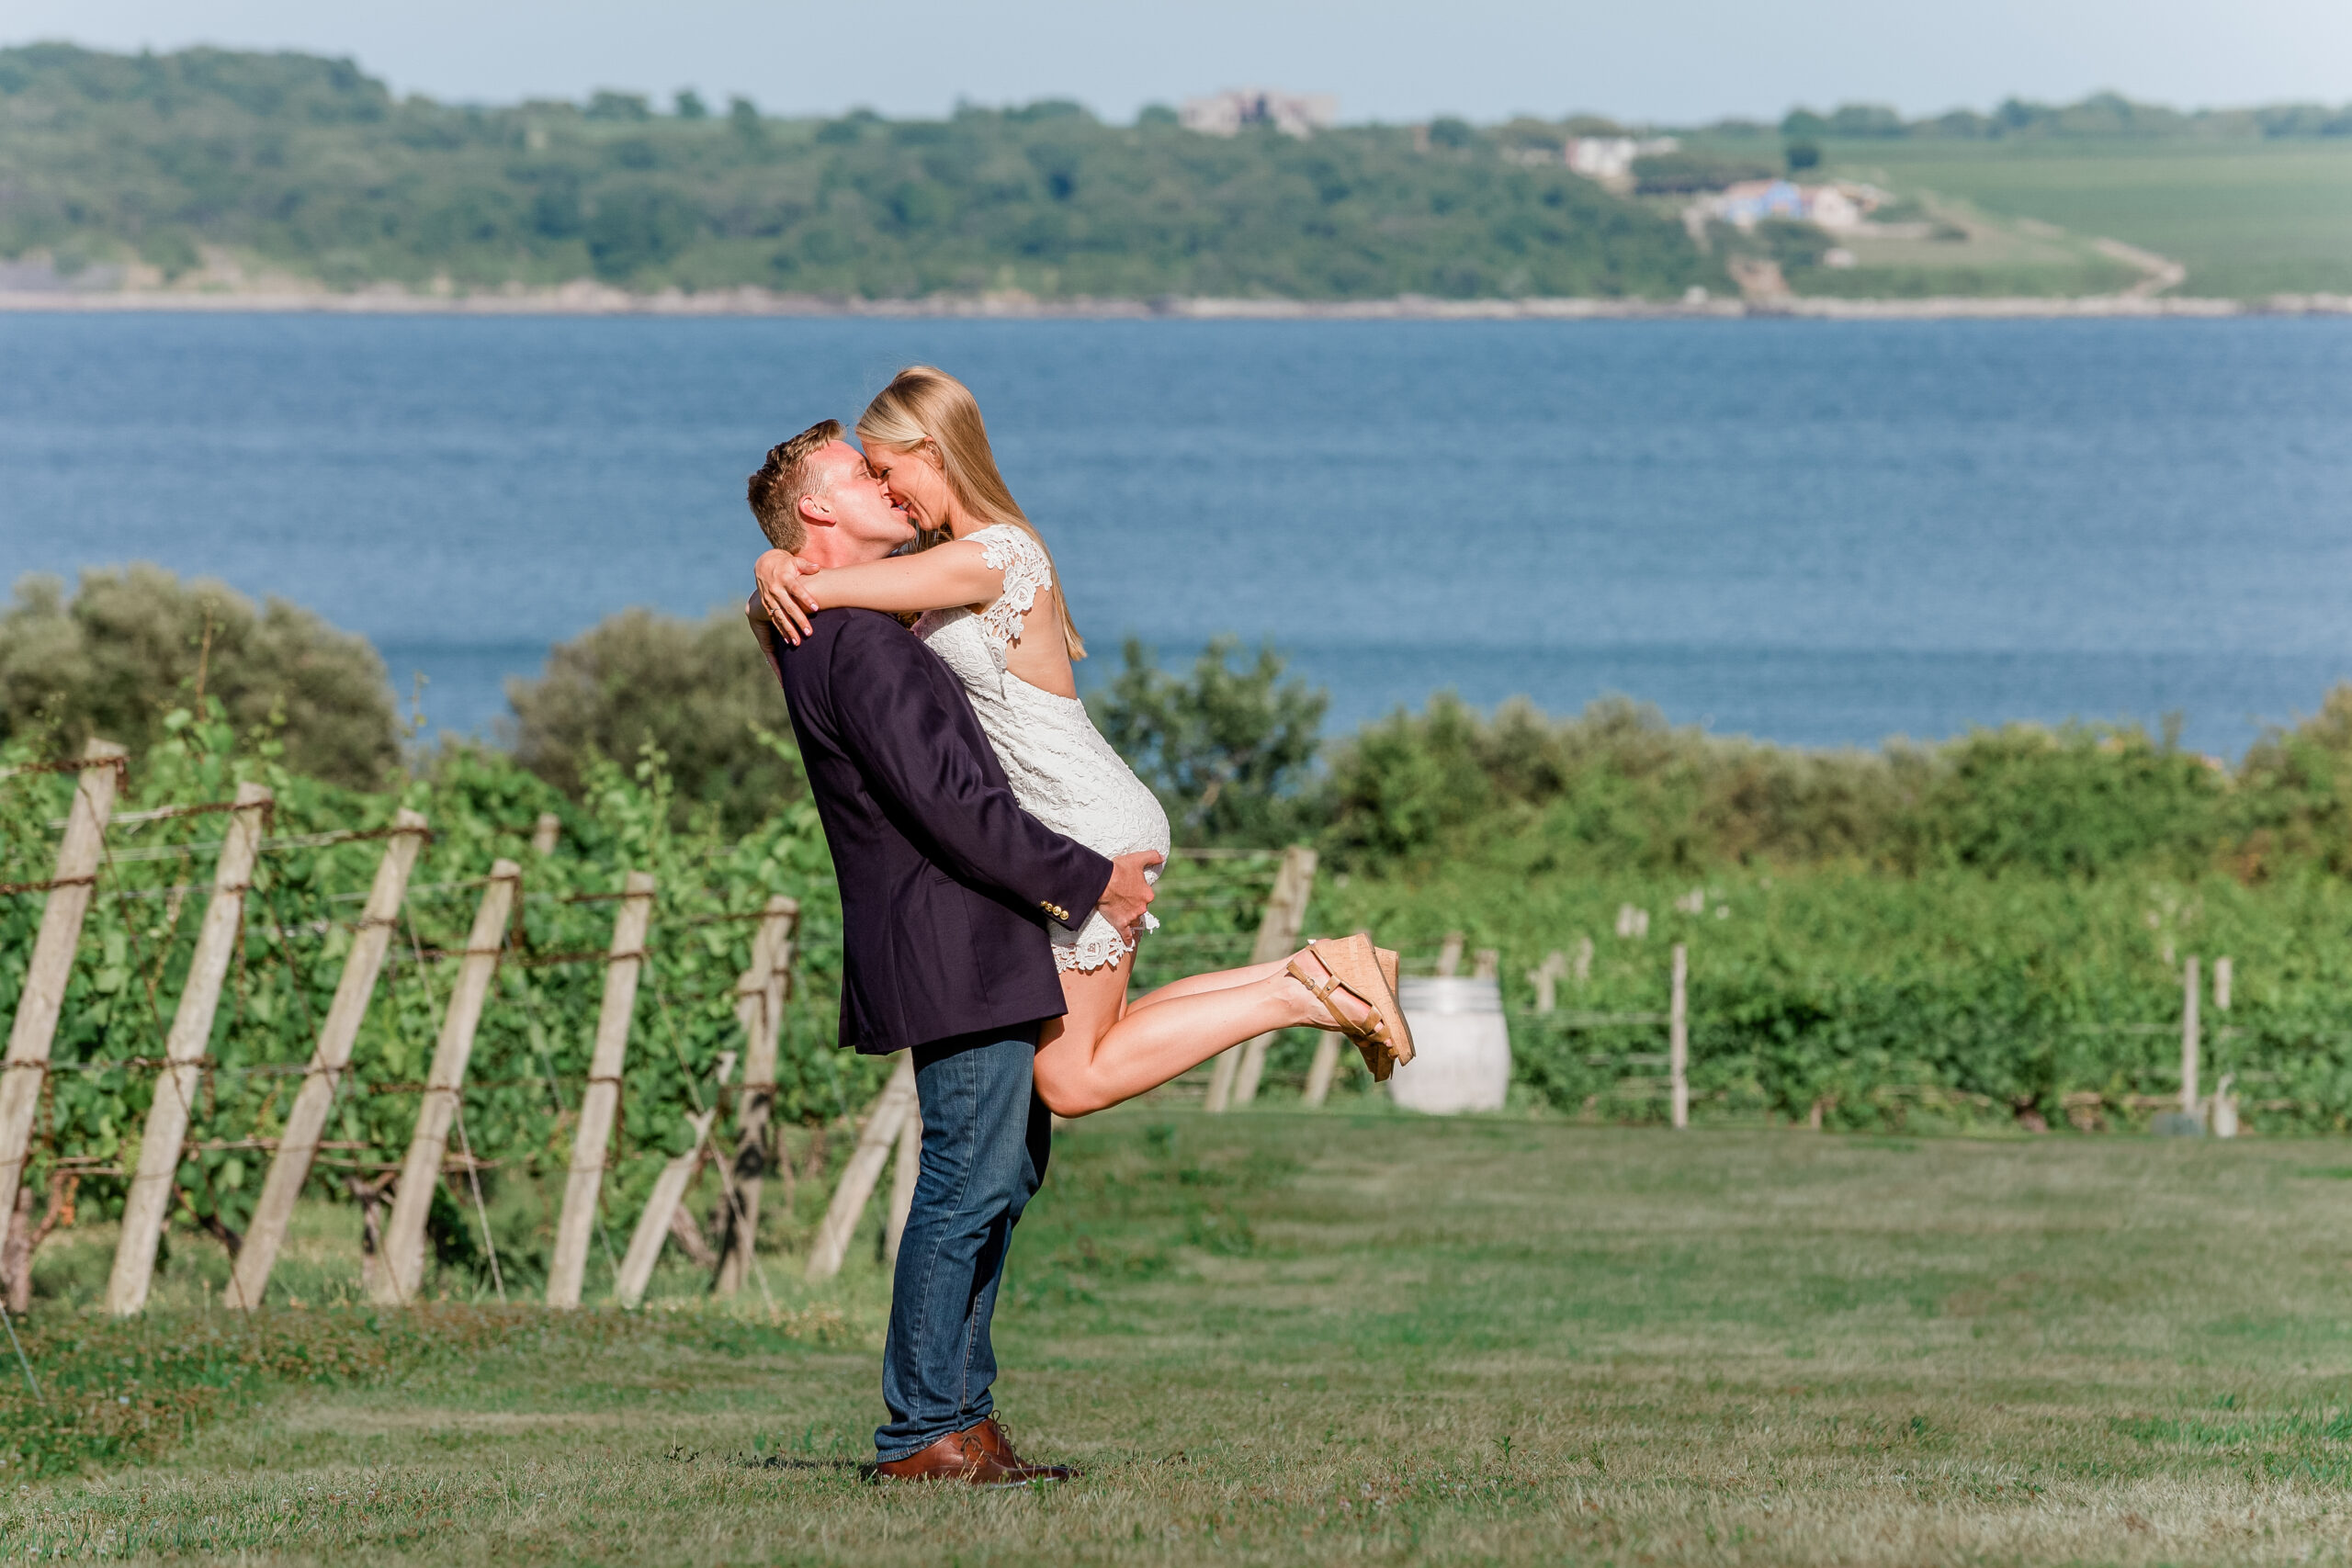 A bride and groom kiss on the grounds of Greenvale Vineyards overlooking the Sakonnet River.